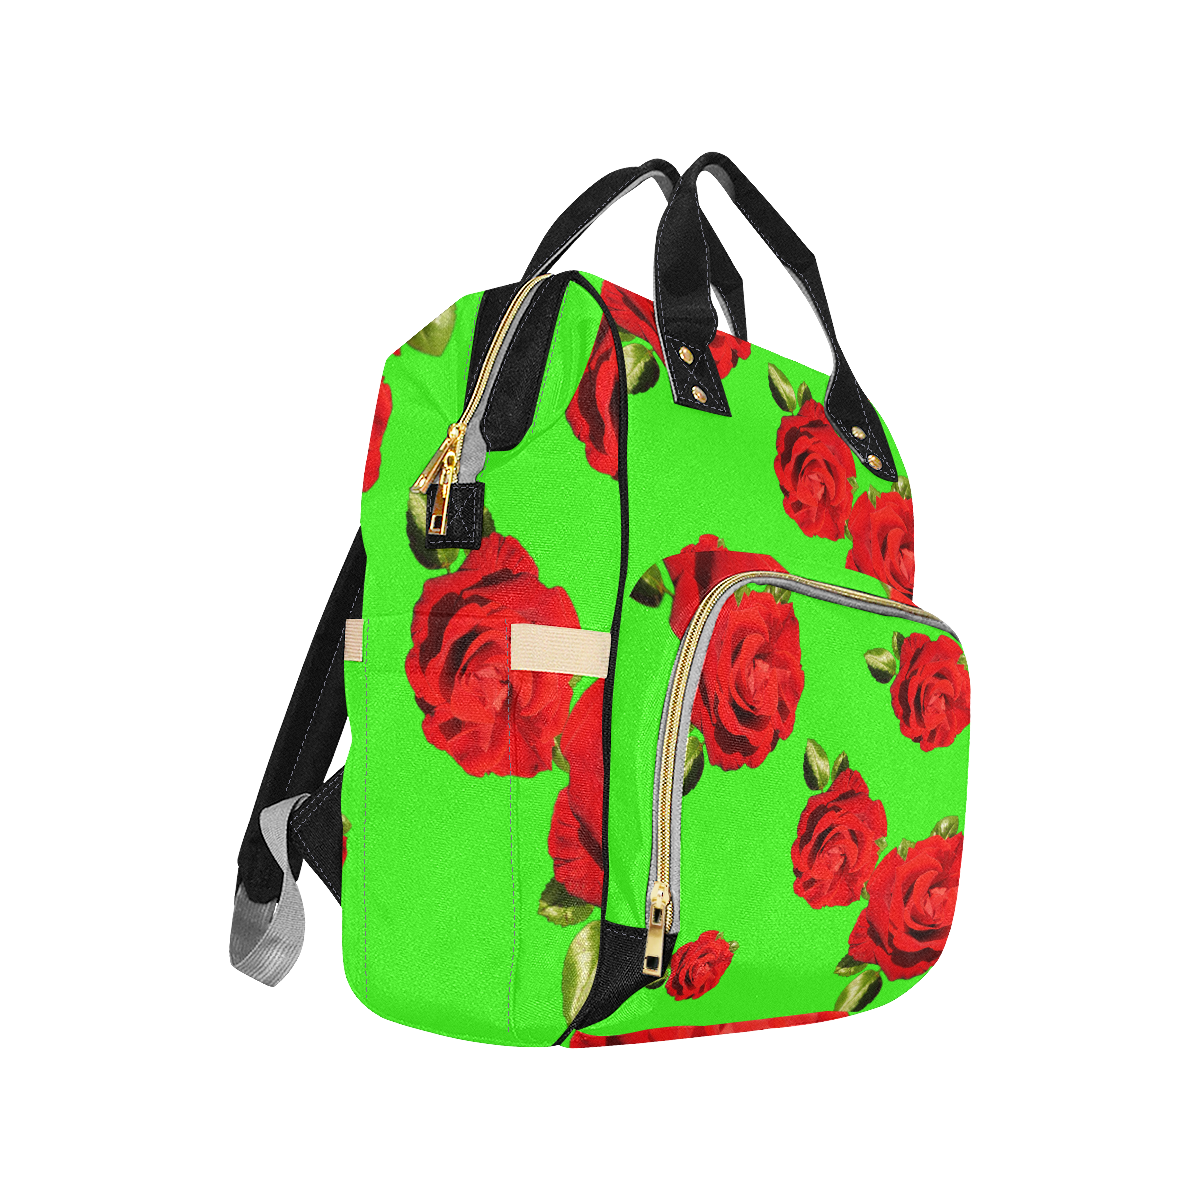 Fairlings Delight's Floral Luxury Collection- Red Rose Multi-Function Diaper Backpack 53086c18 Multi-Function Diaper Backpack/Diaper Bag (Model 1688)